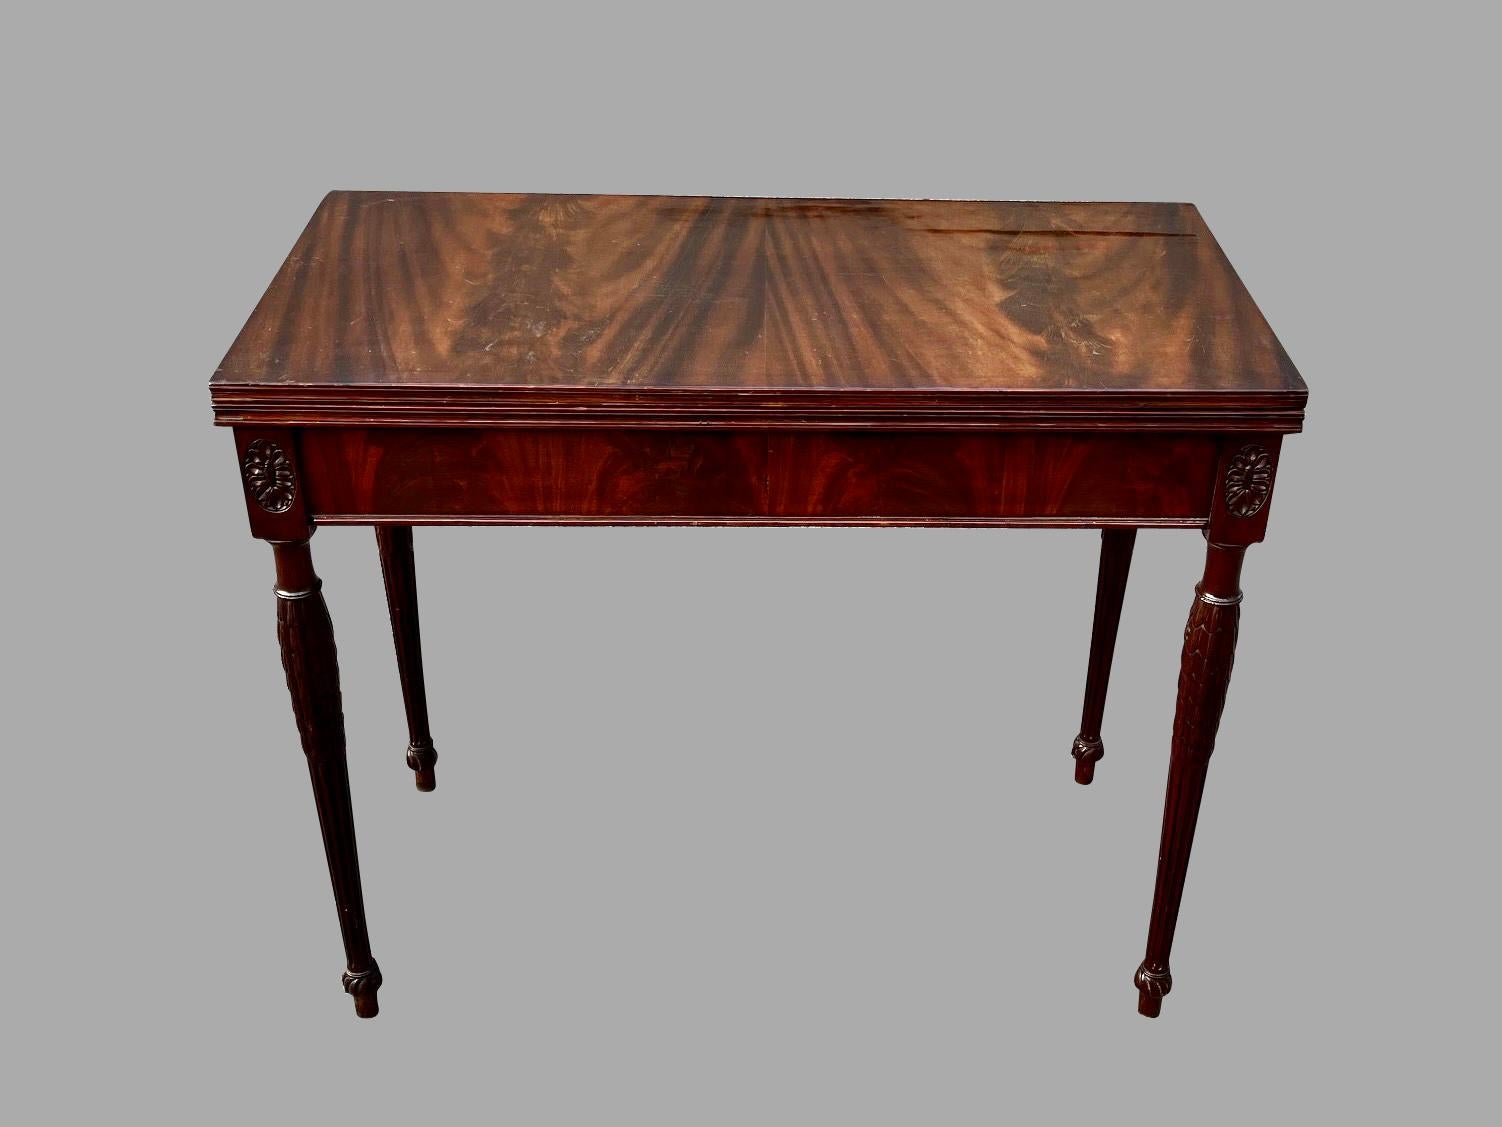 English Sheraton Mahogany Flip Top Games Table with Gilt-Tooled Leather Top  For Sale 1